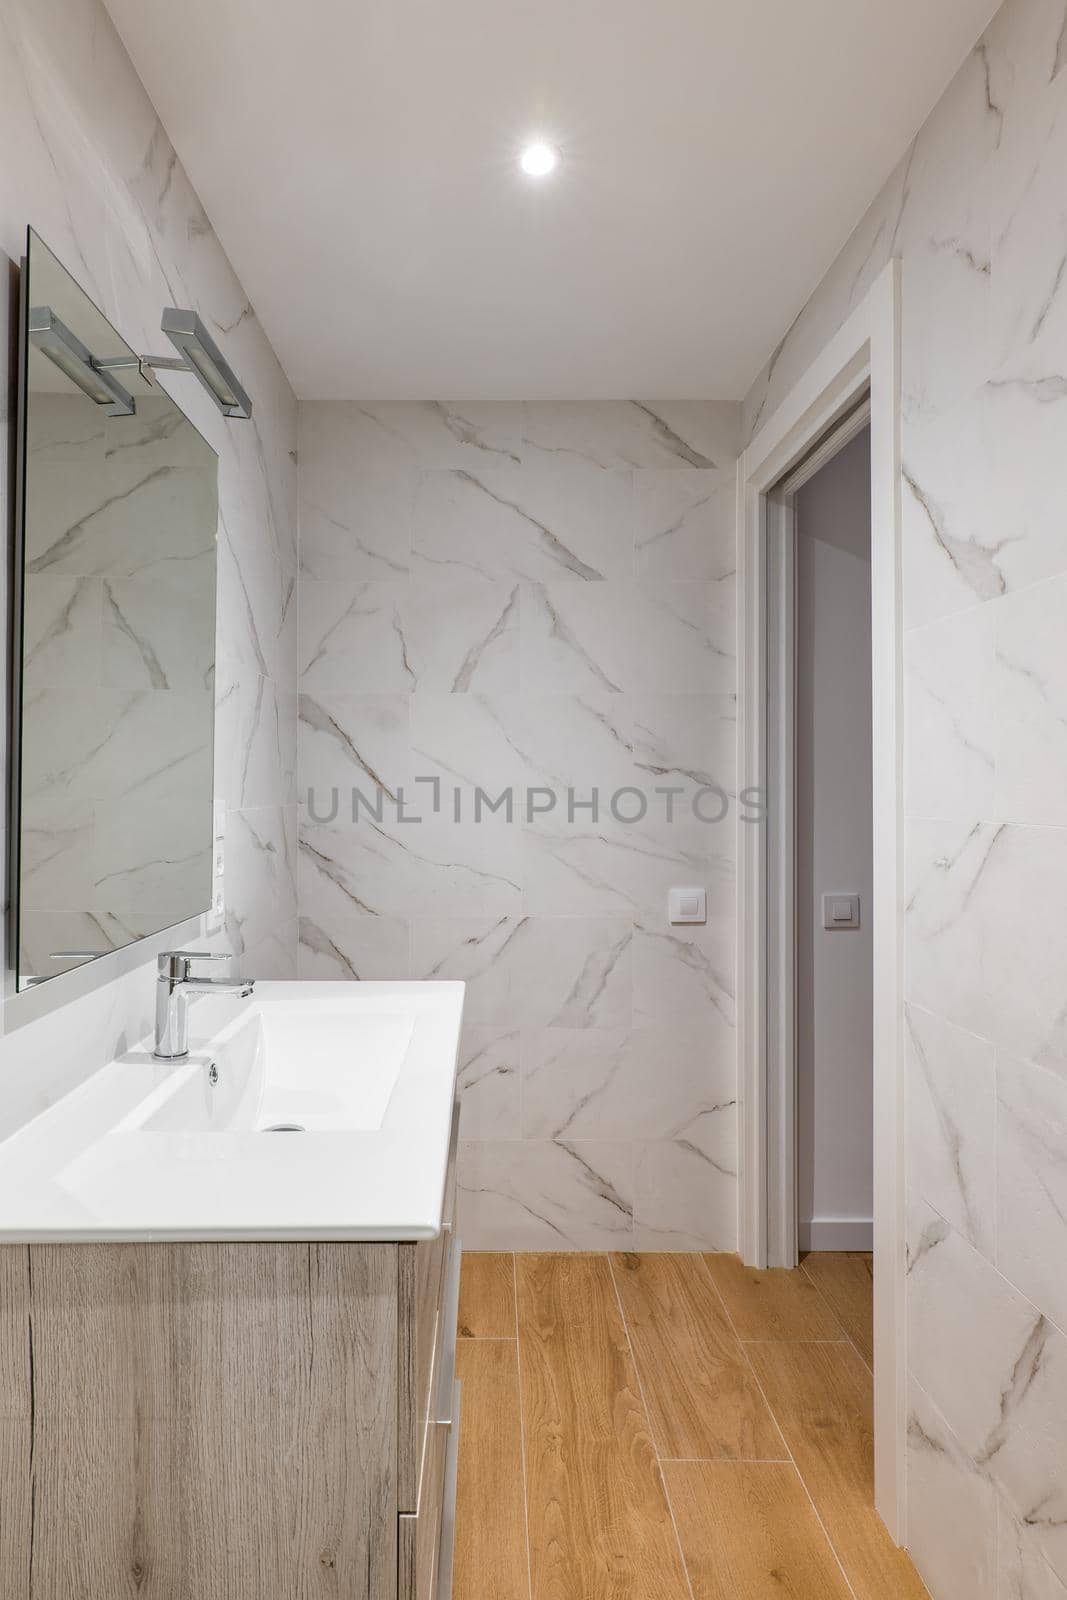 Bathroom with white tiles, mirror, ceramic sink under a wardrobe in a modern house or office. by apavlin